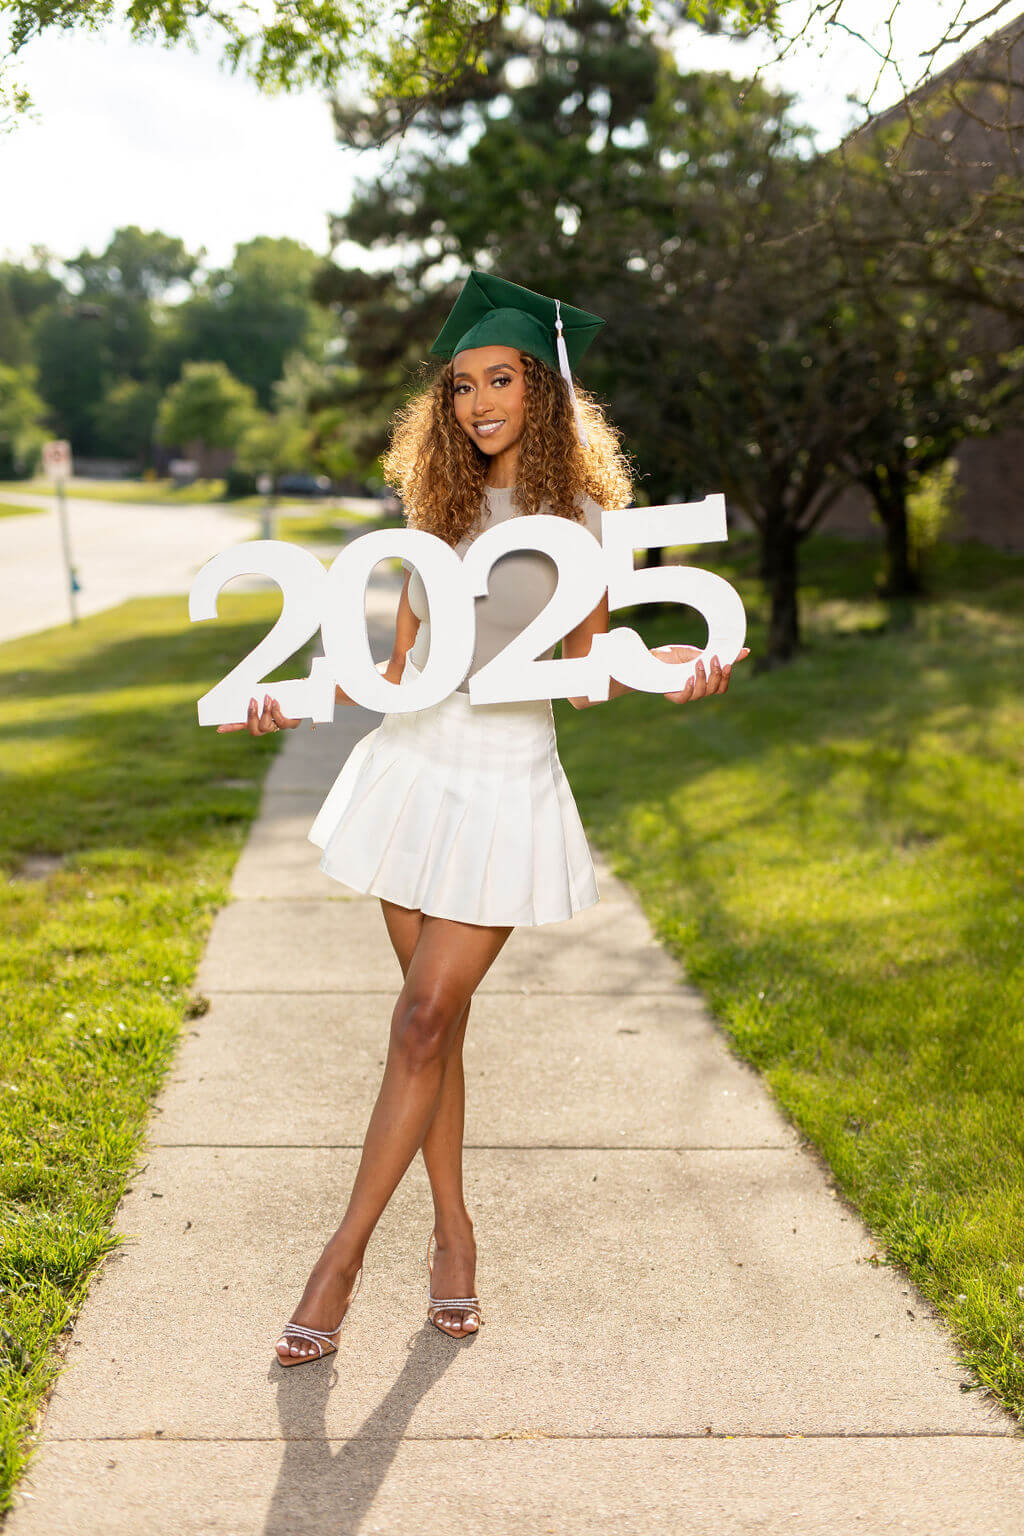 Senior Model holding giant "2025" photo prop while standing on a sidewalk.